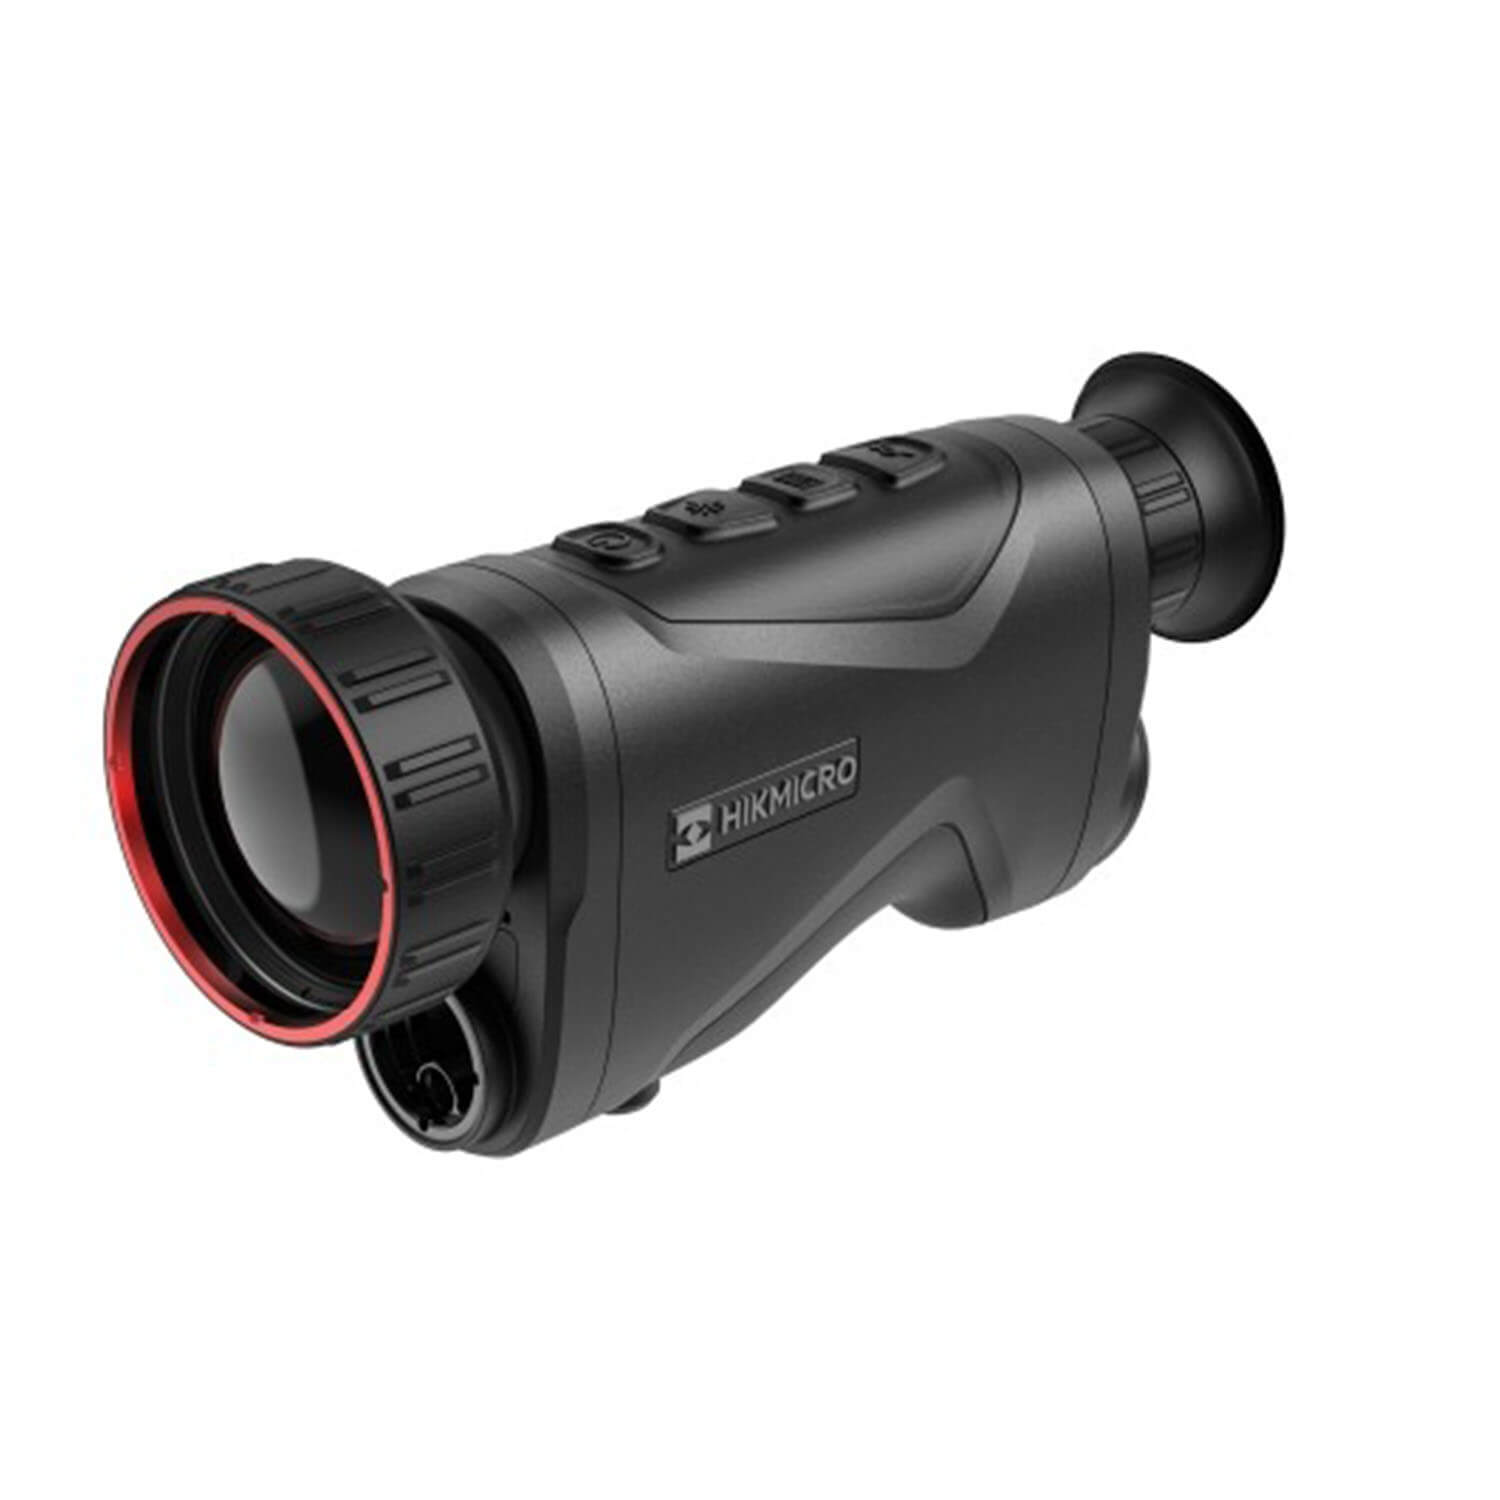 Hikmicro thermal imaging scope Condor CQ50L - Night Vision Devices